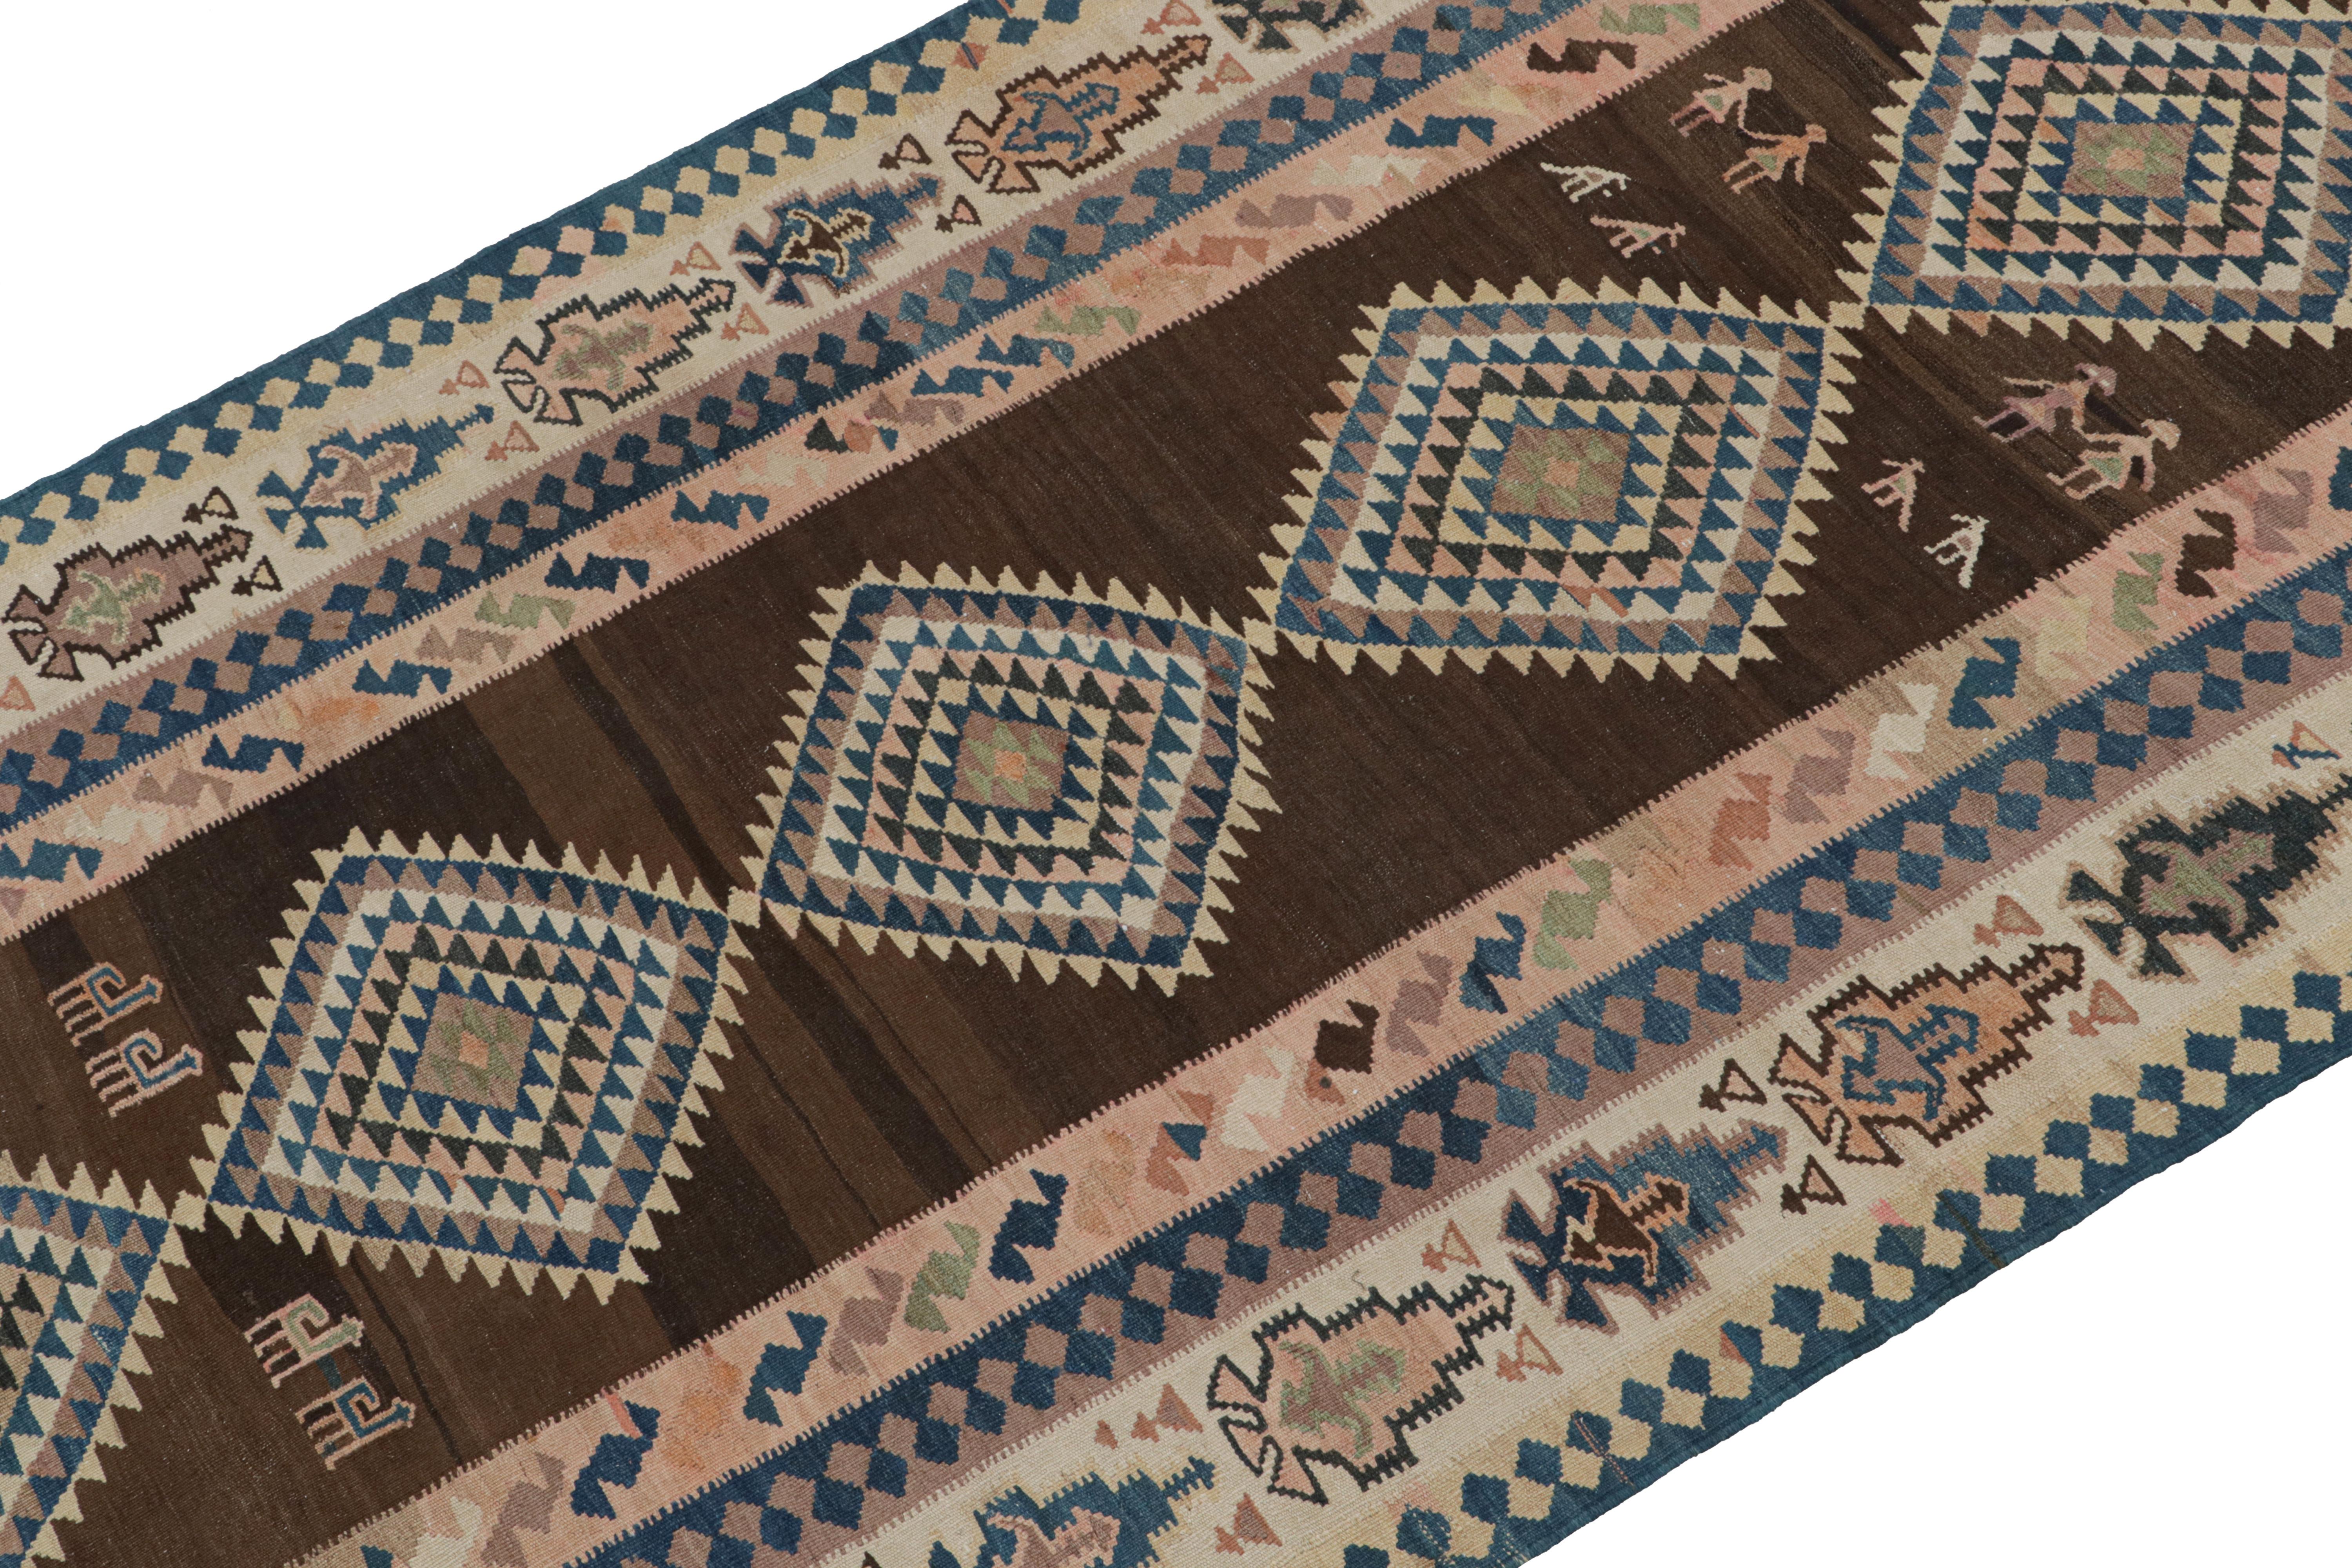 This vintage 5x12 Persian Kilim is believed to be a tribal rug from the Ghazvin region—handwoven in wool circa 1950-1960. 

On the Design: 

This midcentury rug enjoys a rich brown field and beige border, with especially present navy blue and